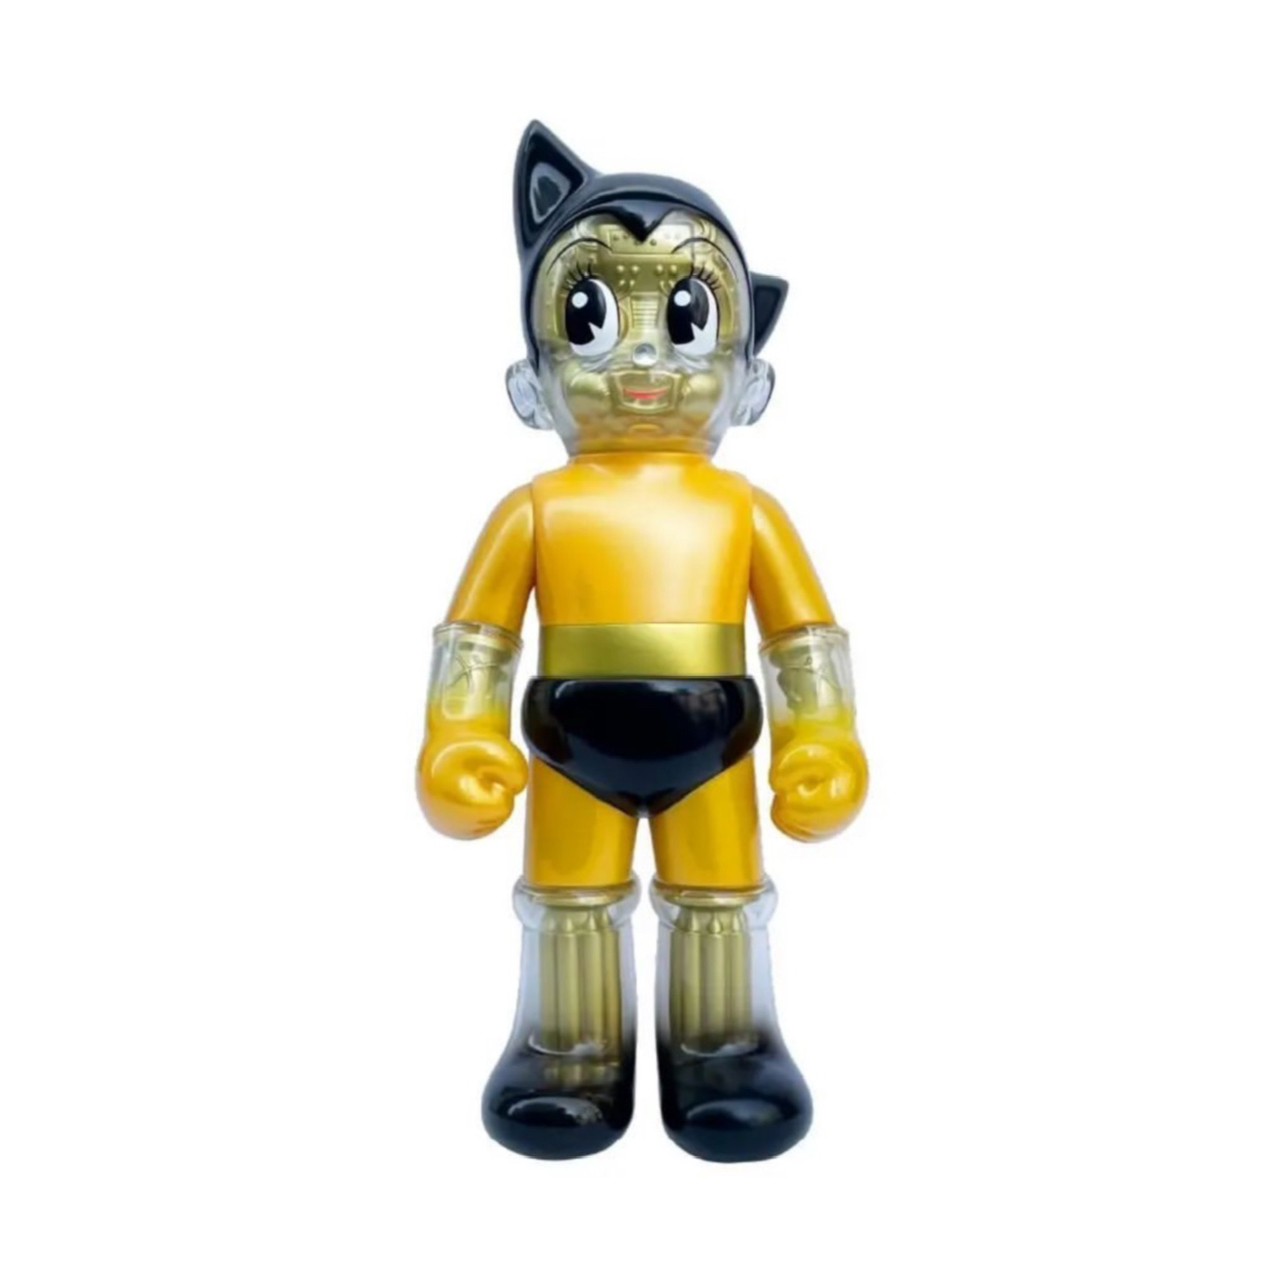 Middle Scale Astro Boy Gold シークレットベース-